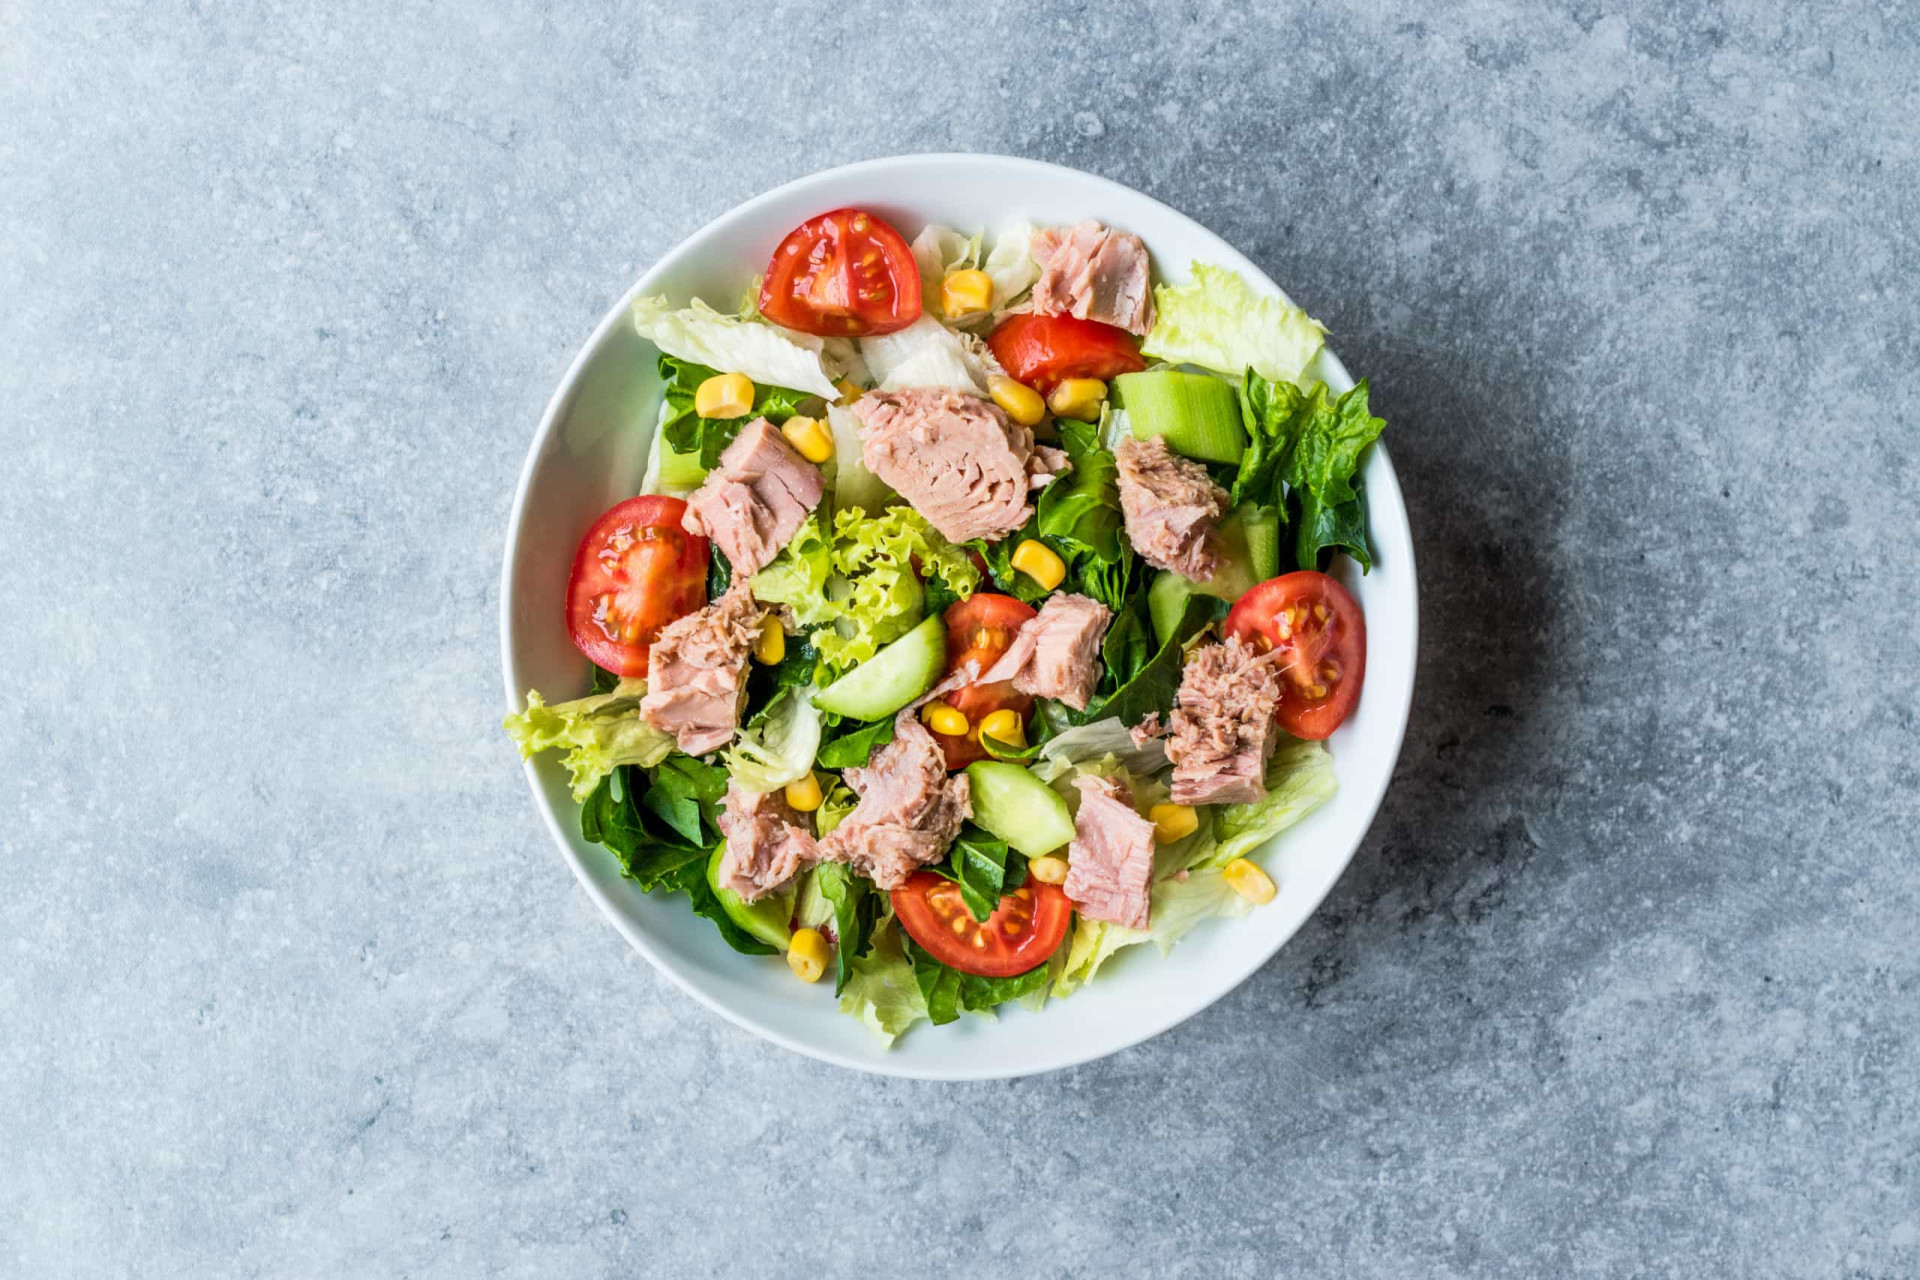 <p>Tuna is a rich source of nutrients like vitamin C, selenium, manganese, and zinc, known for enhancing the immune system.</p><p>You may also like:<a href="https://www.starsinsider.com/n/256255?utm_source=msn.com&utm_medium=display&utm_campaign=referral_description&utm_content=578219en-en"> The life and times of Prince Philip, Duke of Edinburgh</a></p>